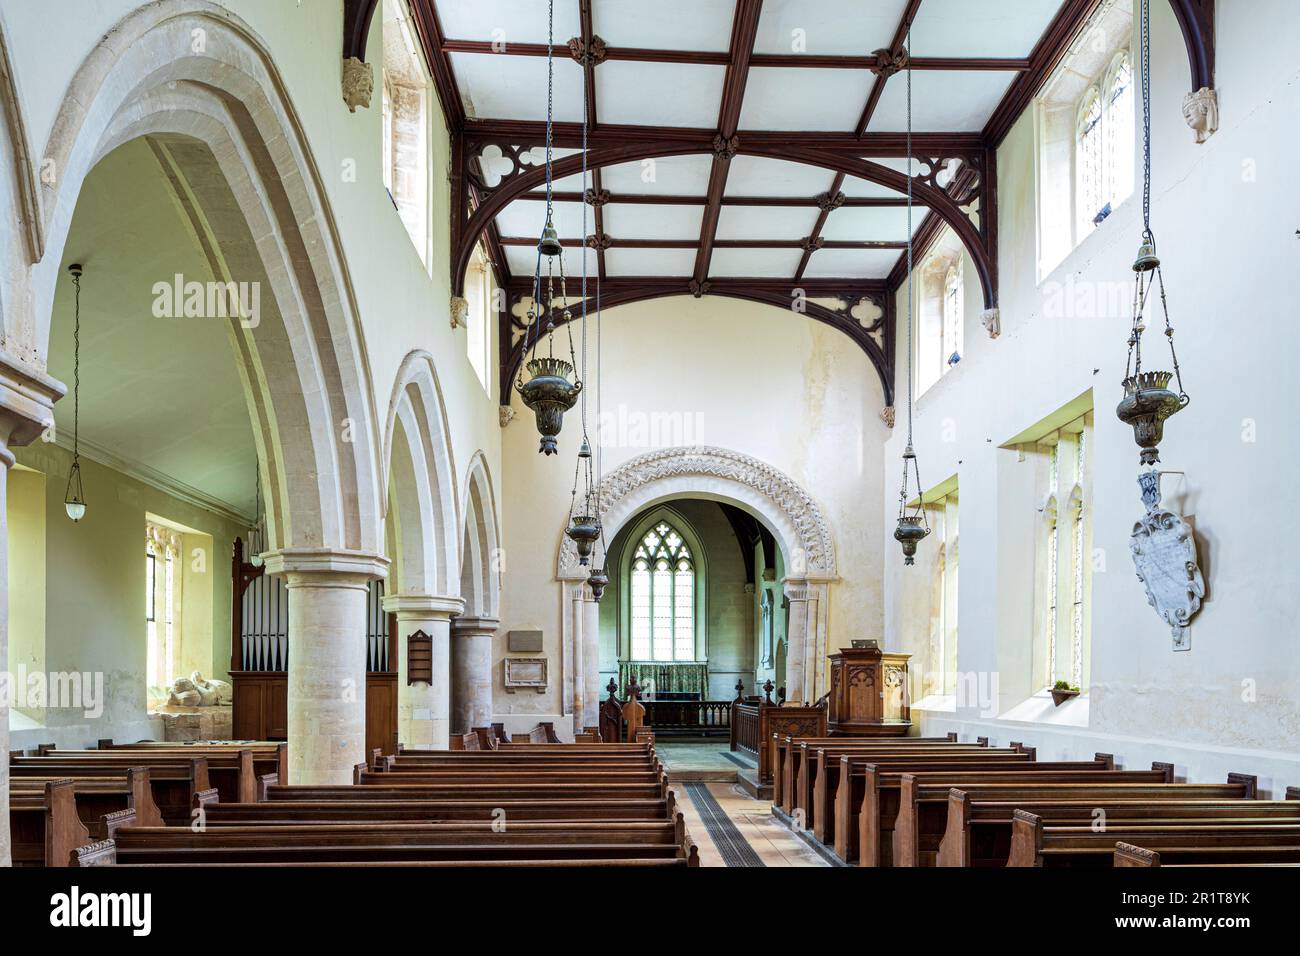 The interior of St Mary's church in the Cotswold village of Great Barrington, Gloucestershire UK Stock Photo